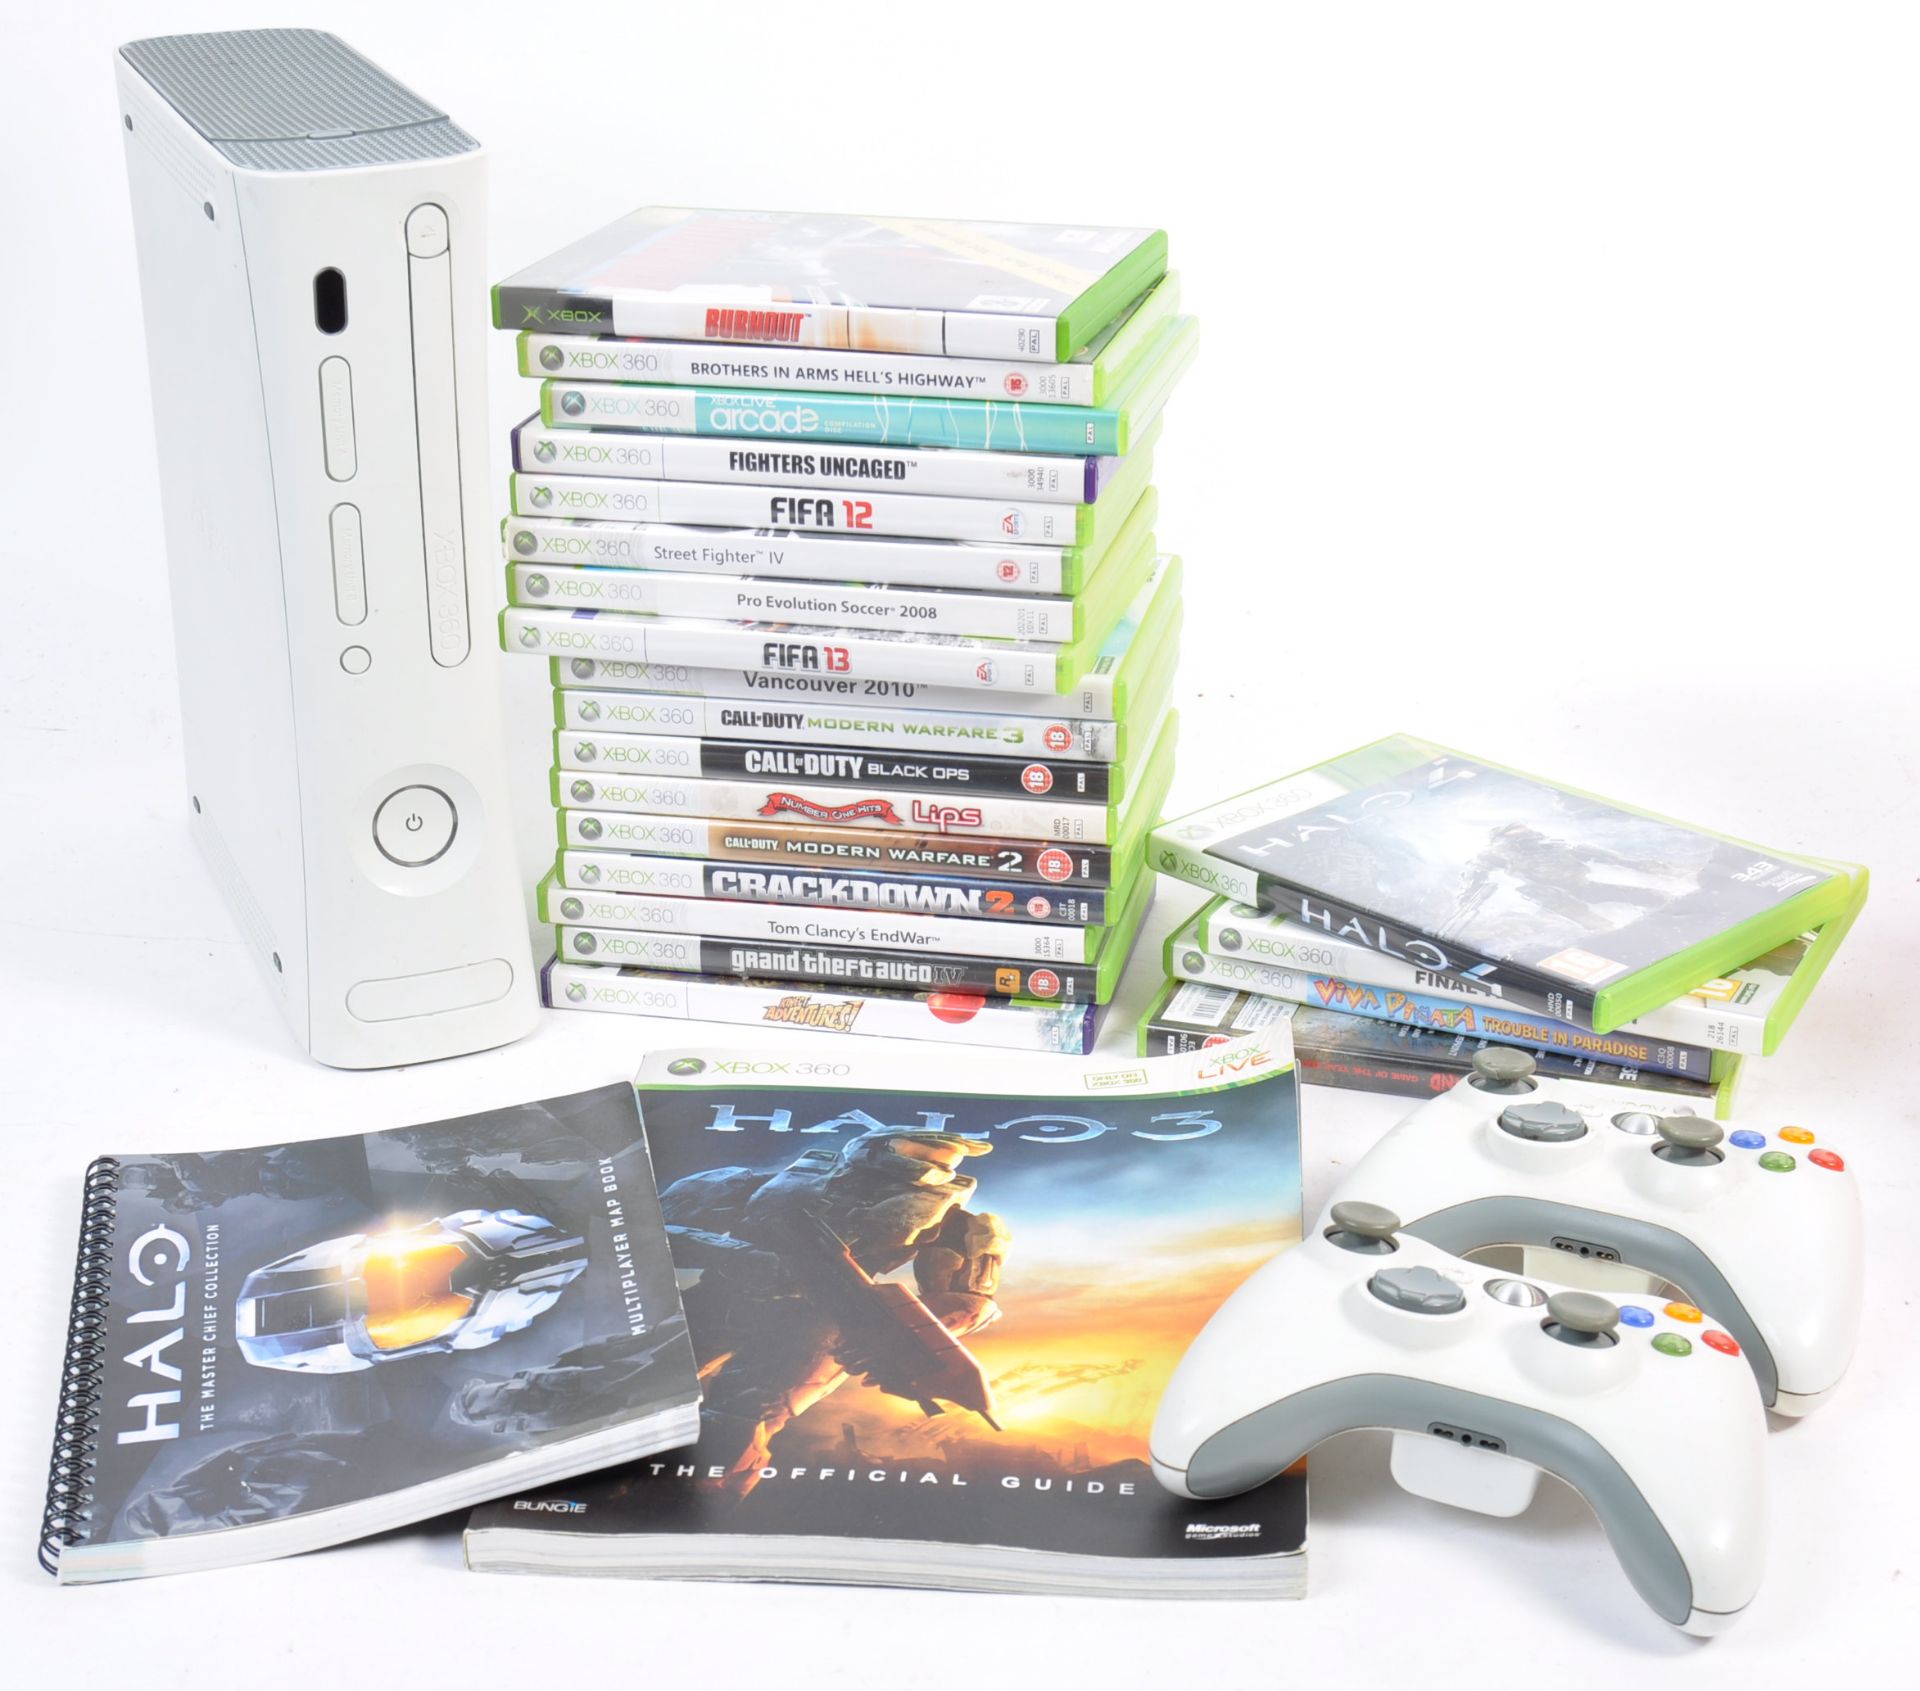 MICROSOFT X BOX 360 GAMES CONSOLE & COLLECTION OF GAMES